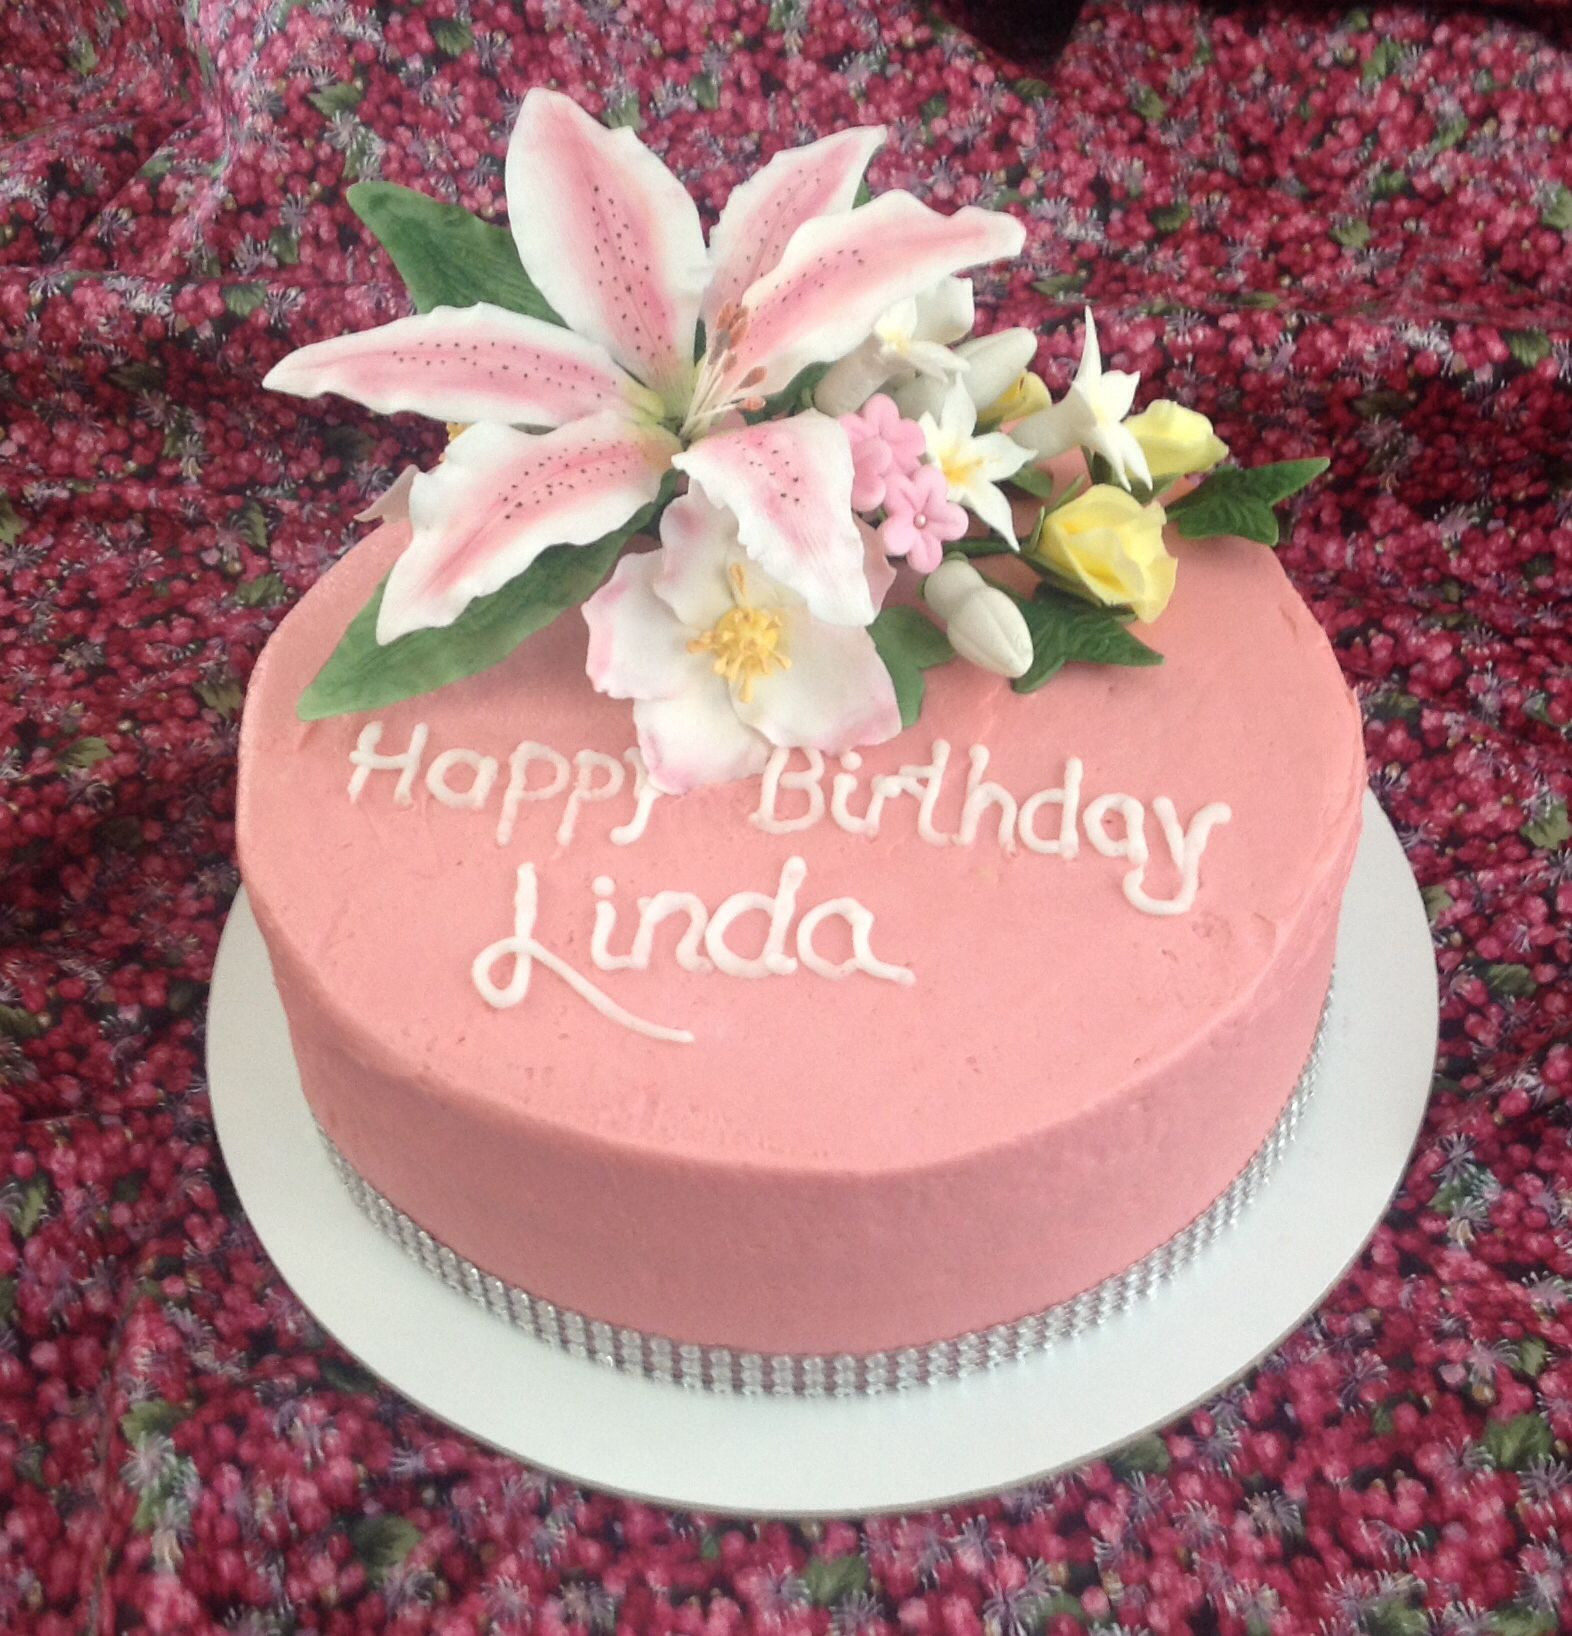 Happy Birthday Linda Cake
 Happy Birthday Linda flower & paper crafting